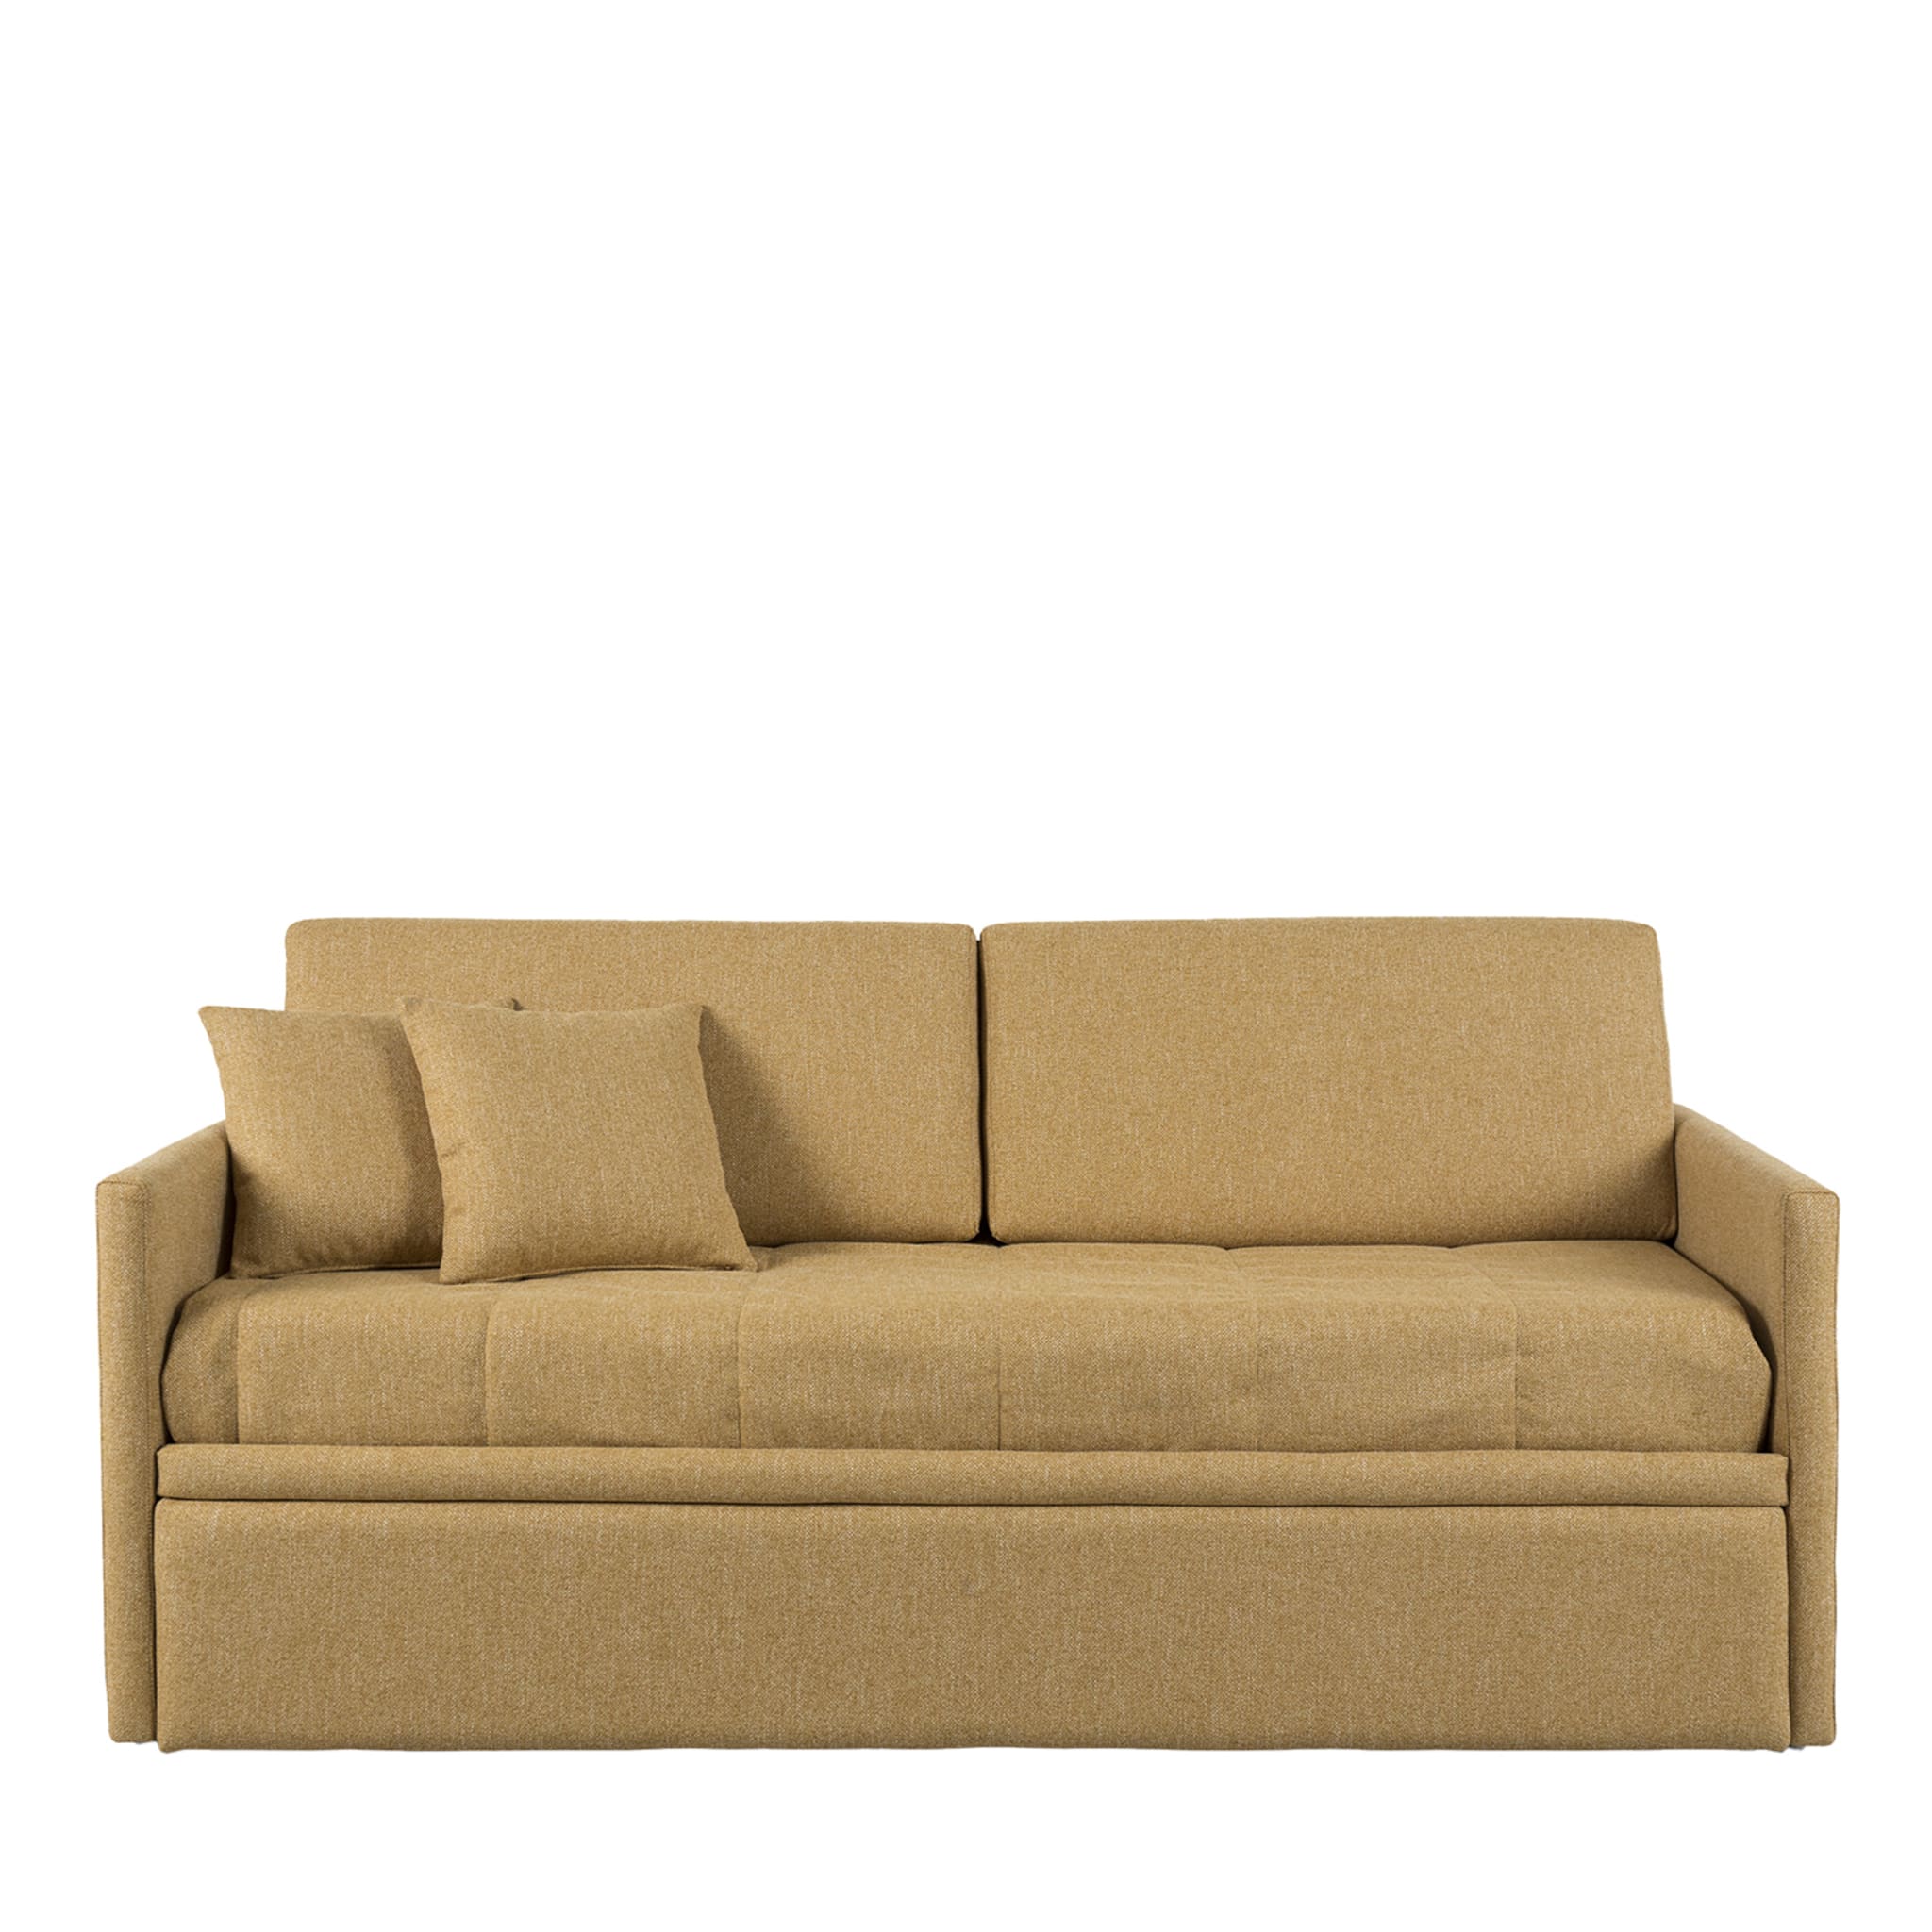 Is a 2 Seater Sofa Bed a Double Bed?